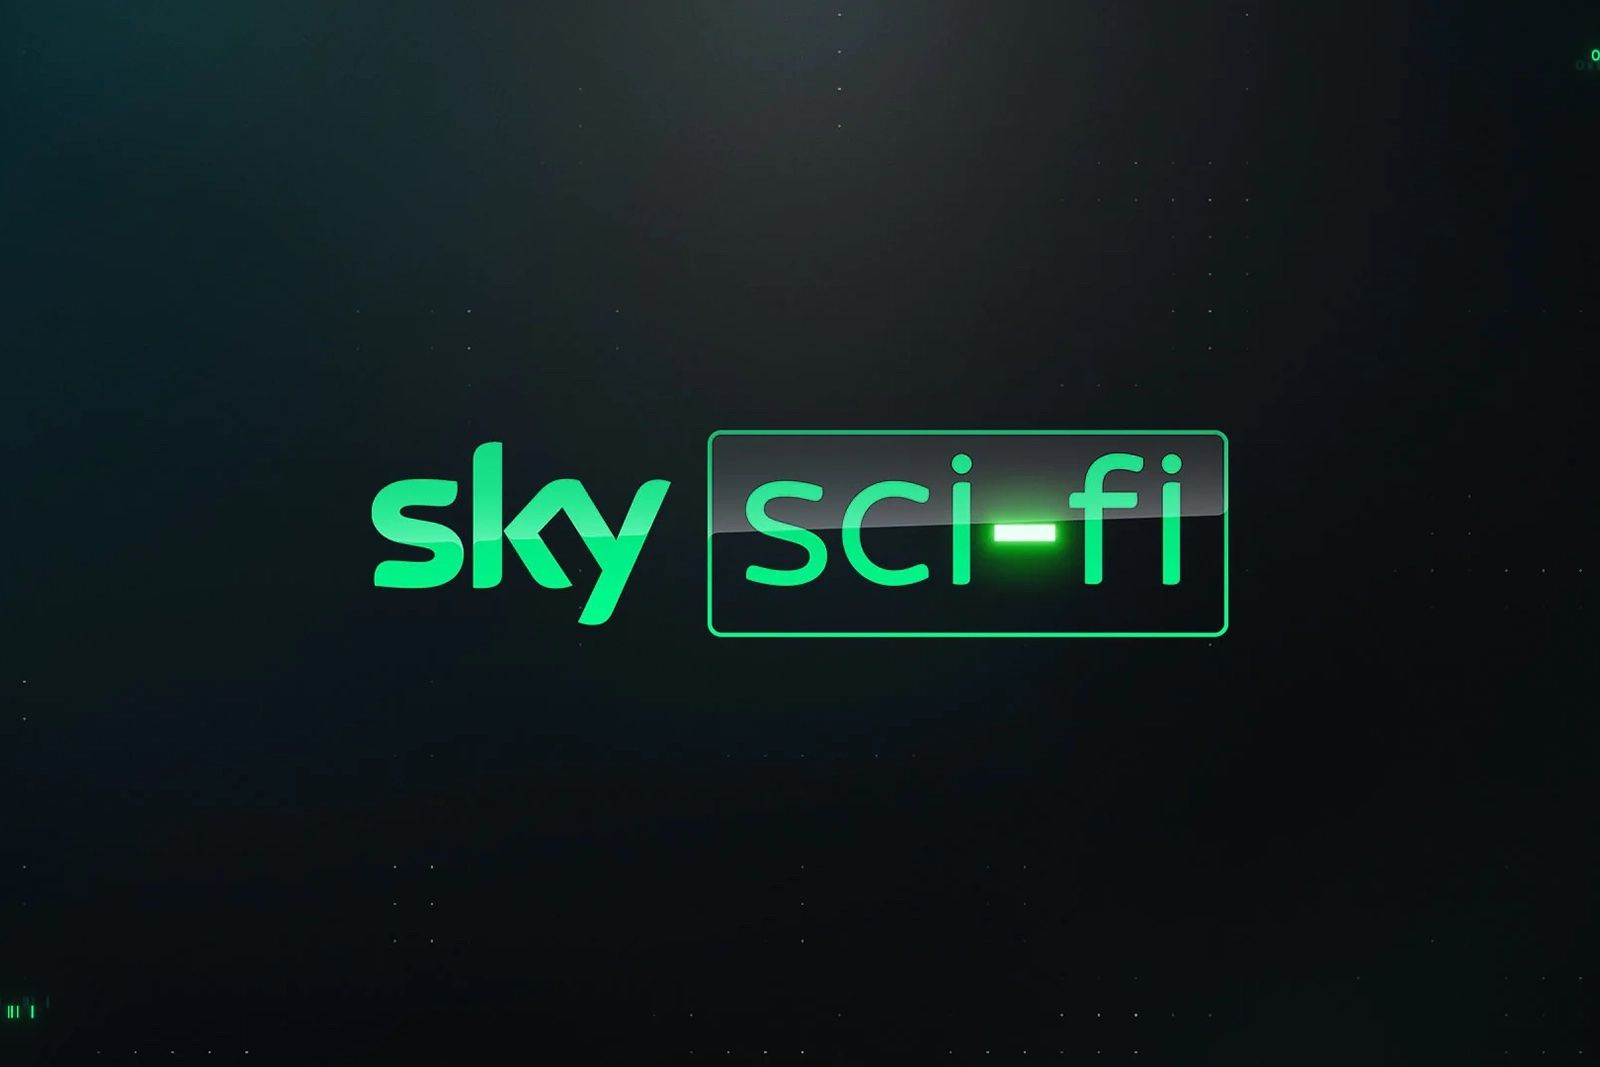 Syfy channel rebranding to Sky Sci-Fi and getting content revamp photo 1